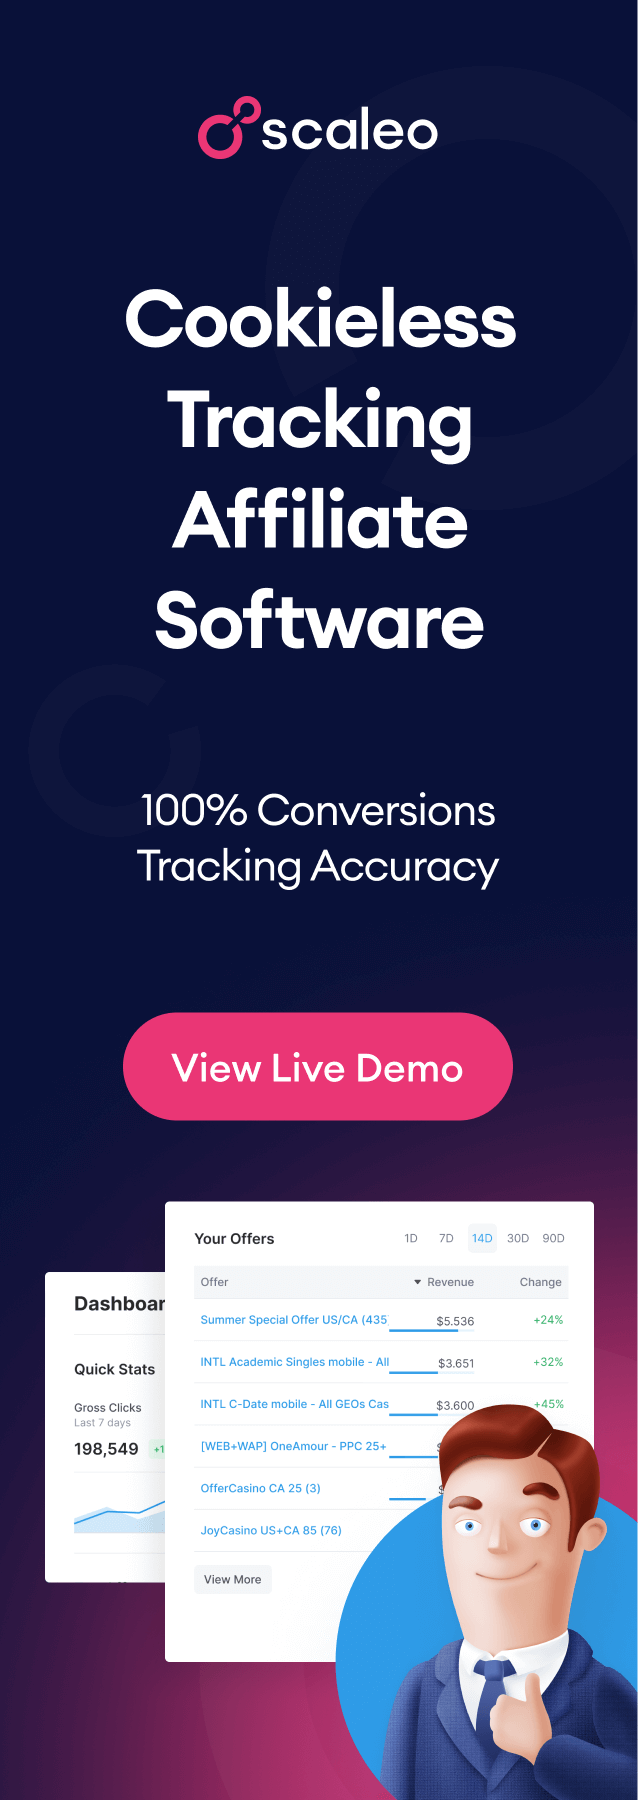 cookieless conversion tracking software scaleo